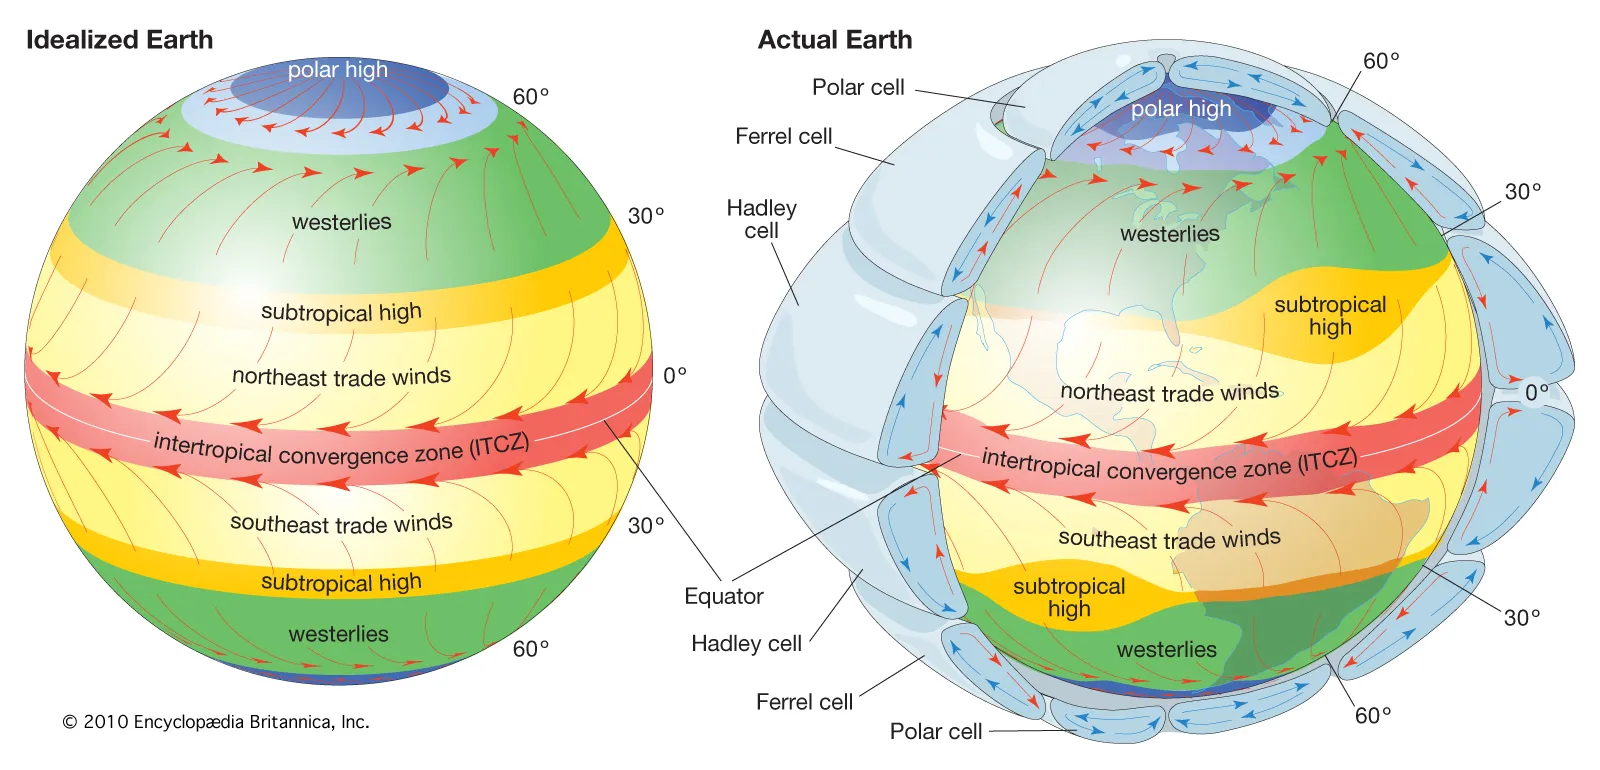 Changes In Atmospheric Circulation Patterns